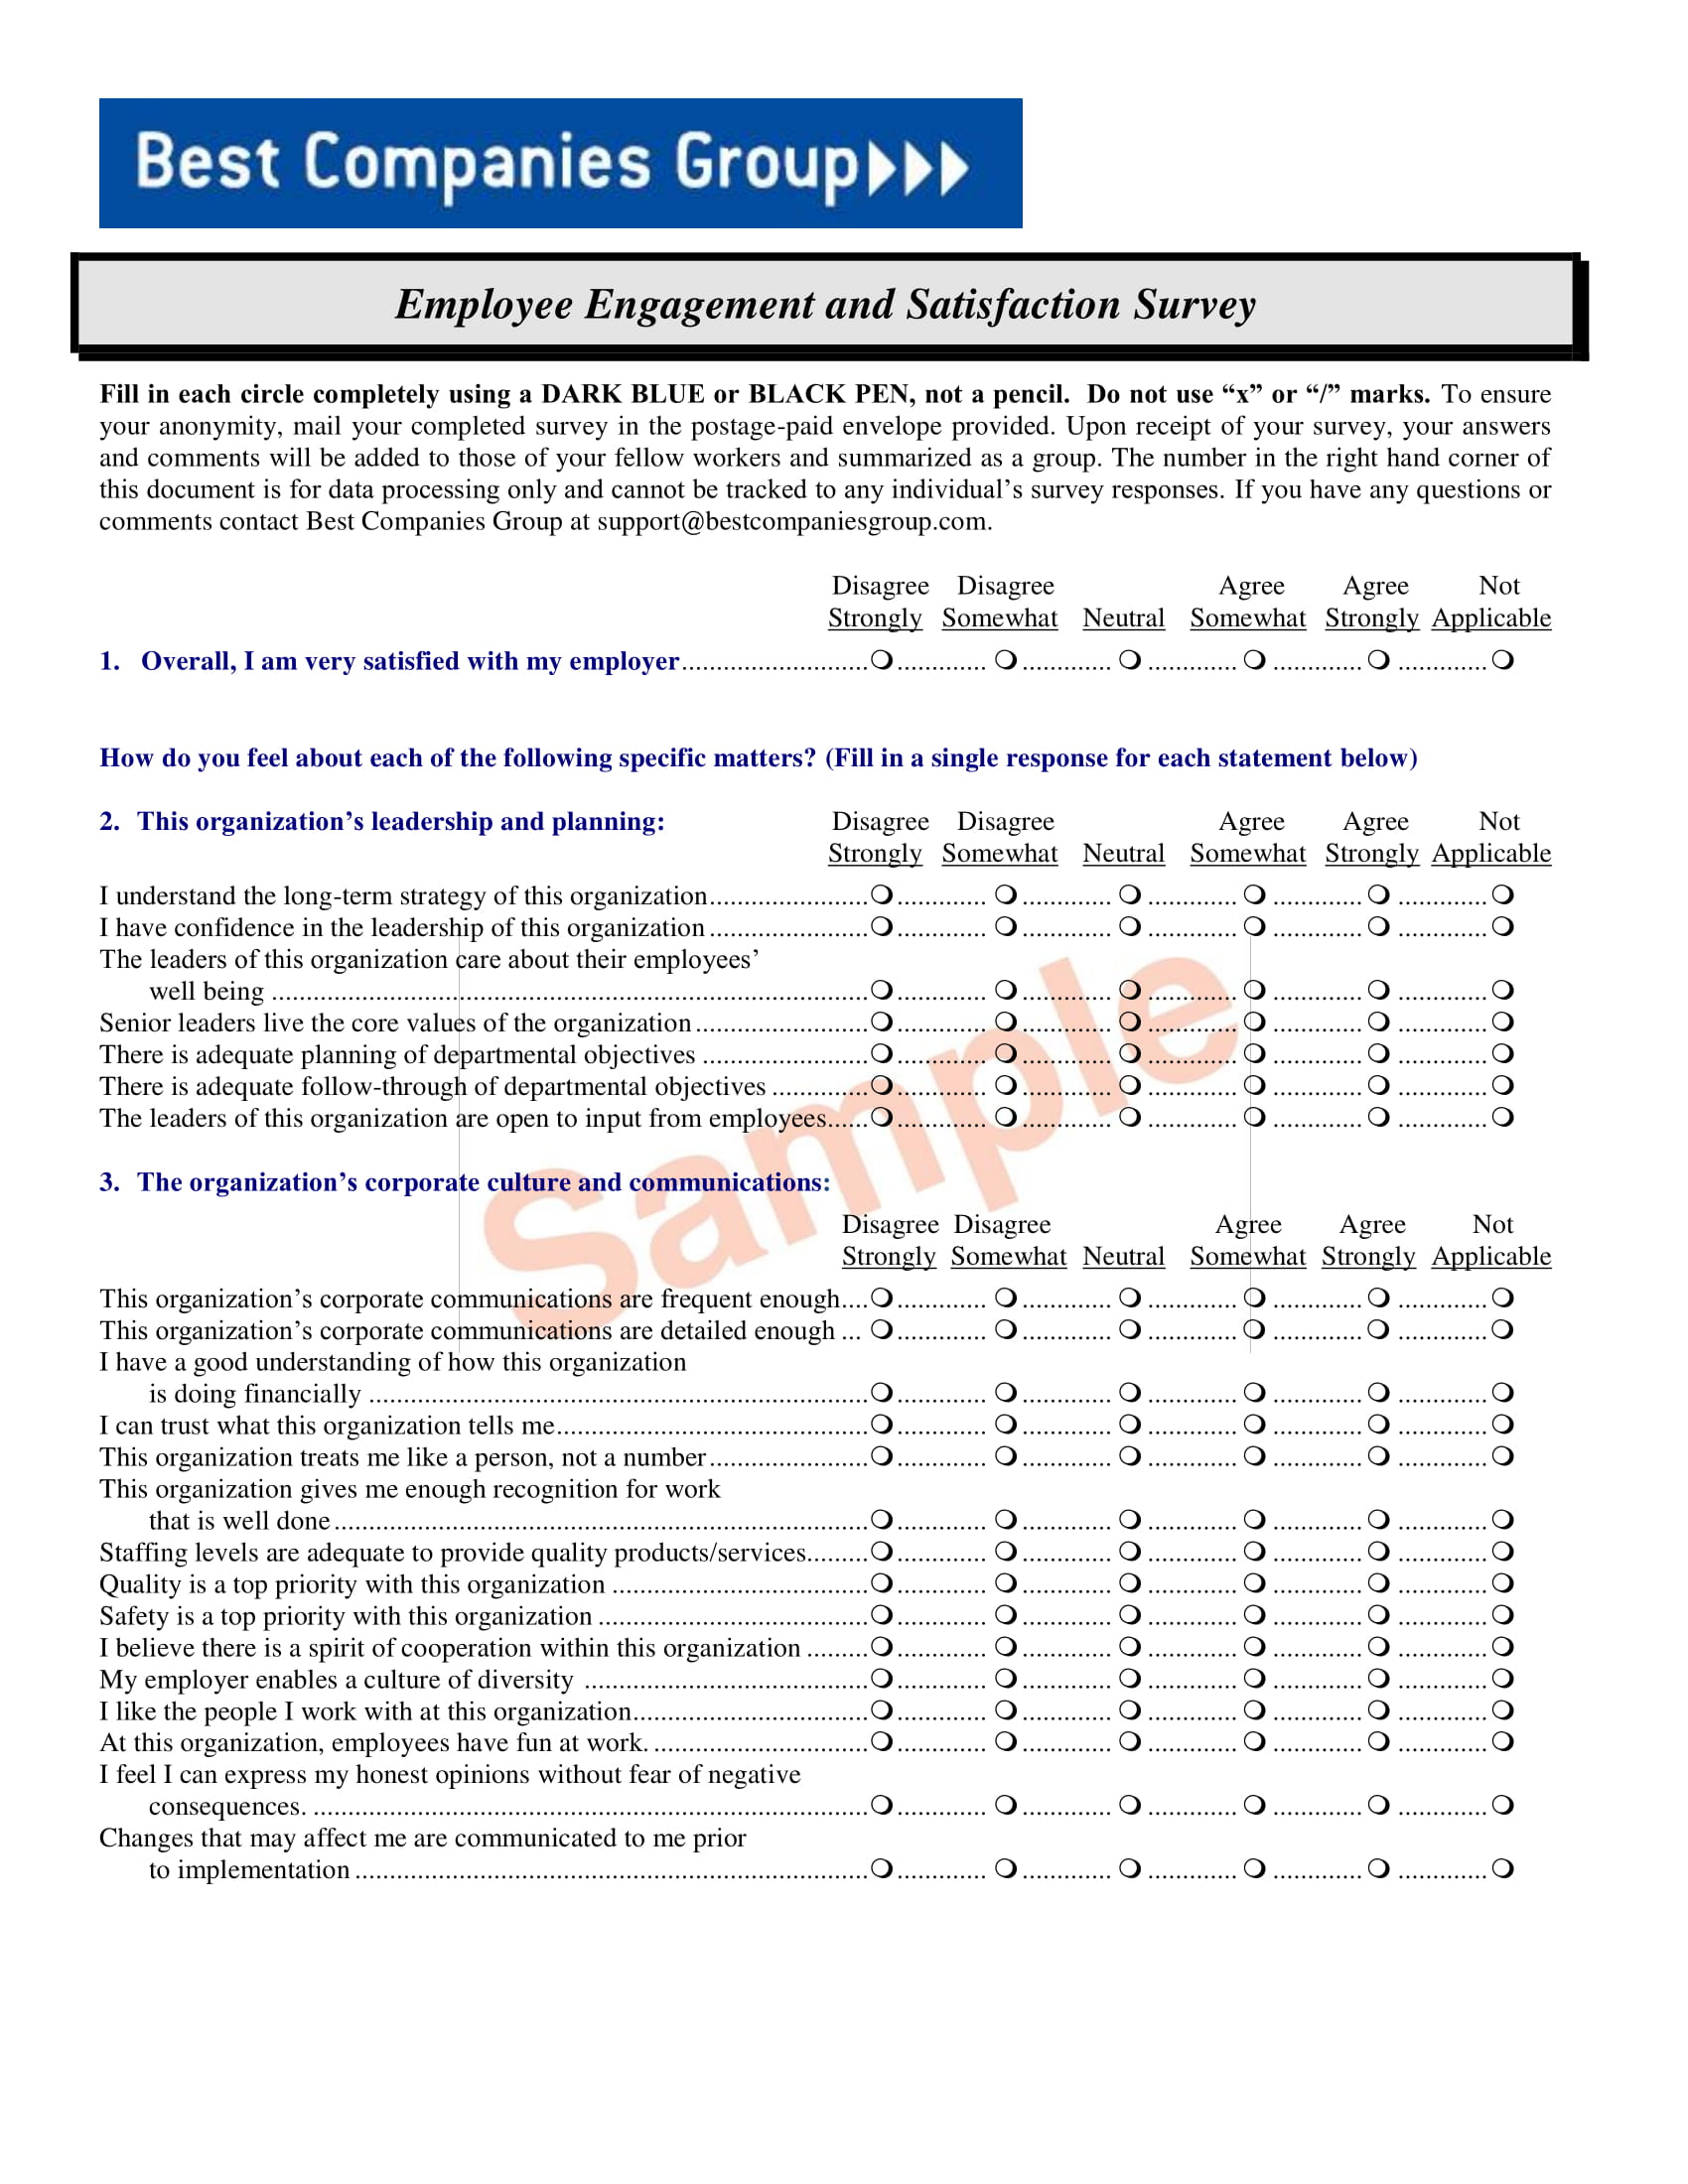 employee engagement and satisfaction survey sample